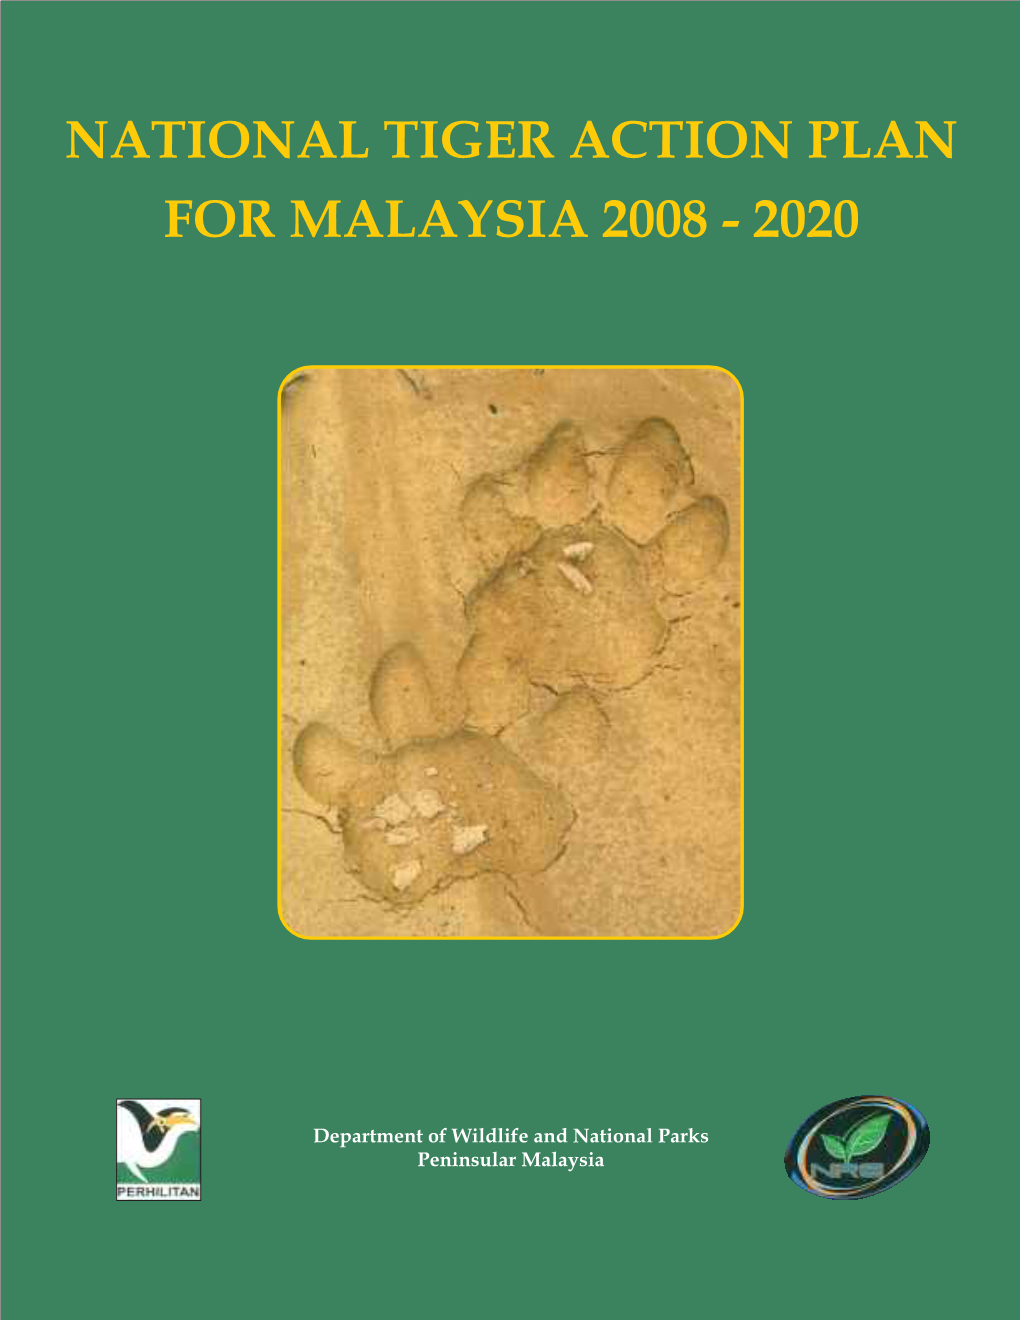 National Tiger Action Plan for Malaysia 2008 - 2020